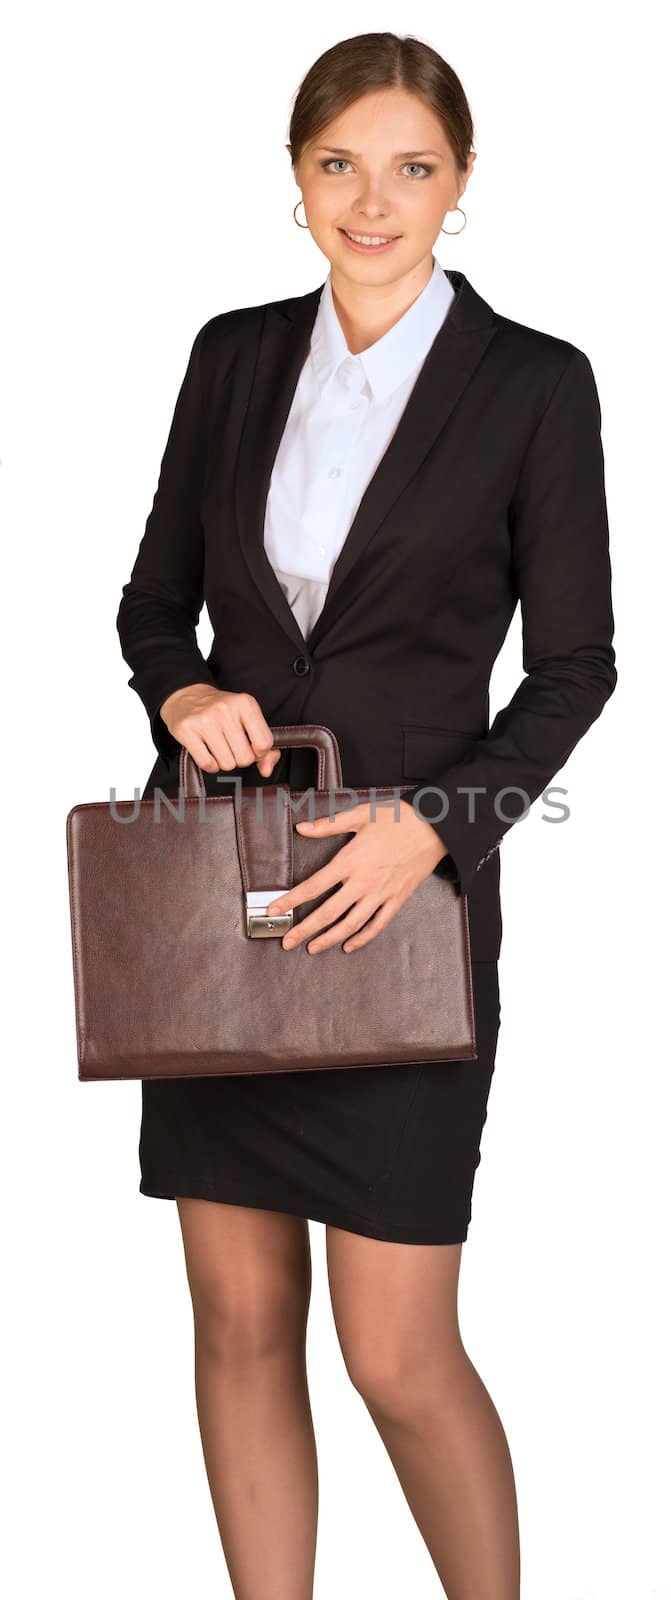 Businesswoman holding briefcase. Isolated on white background